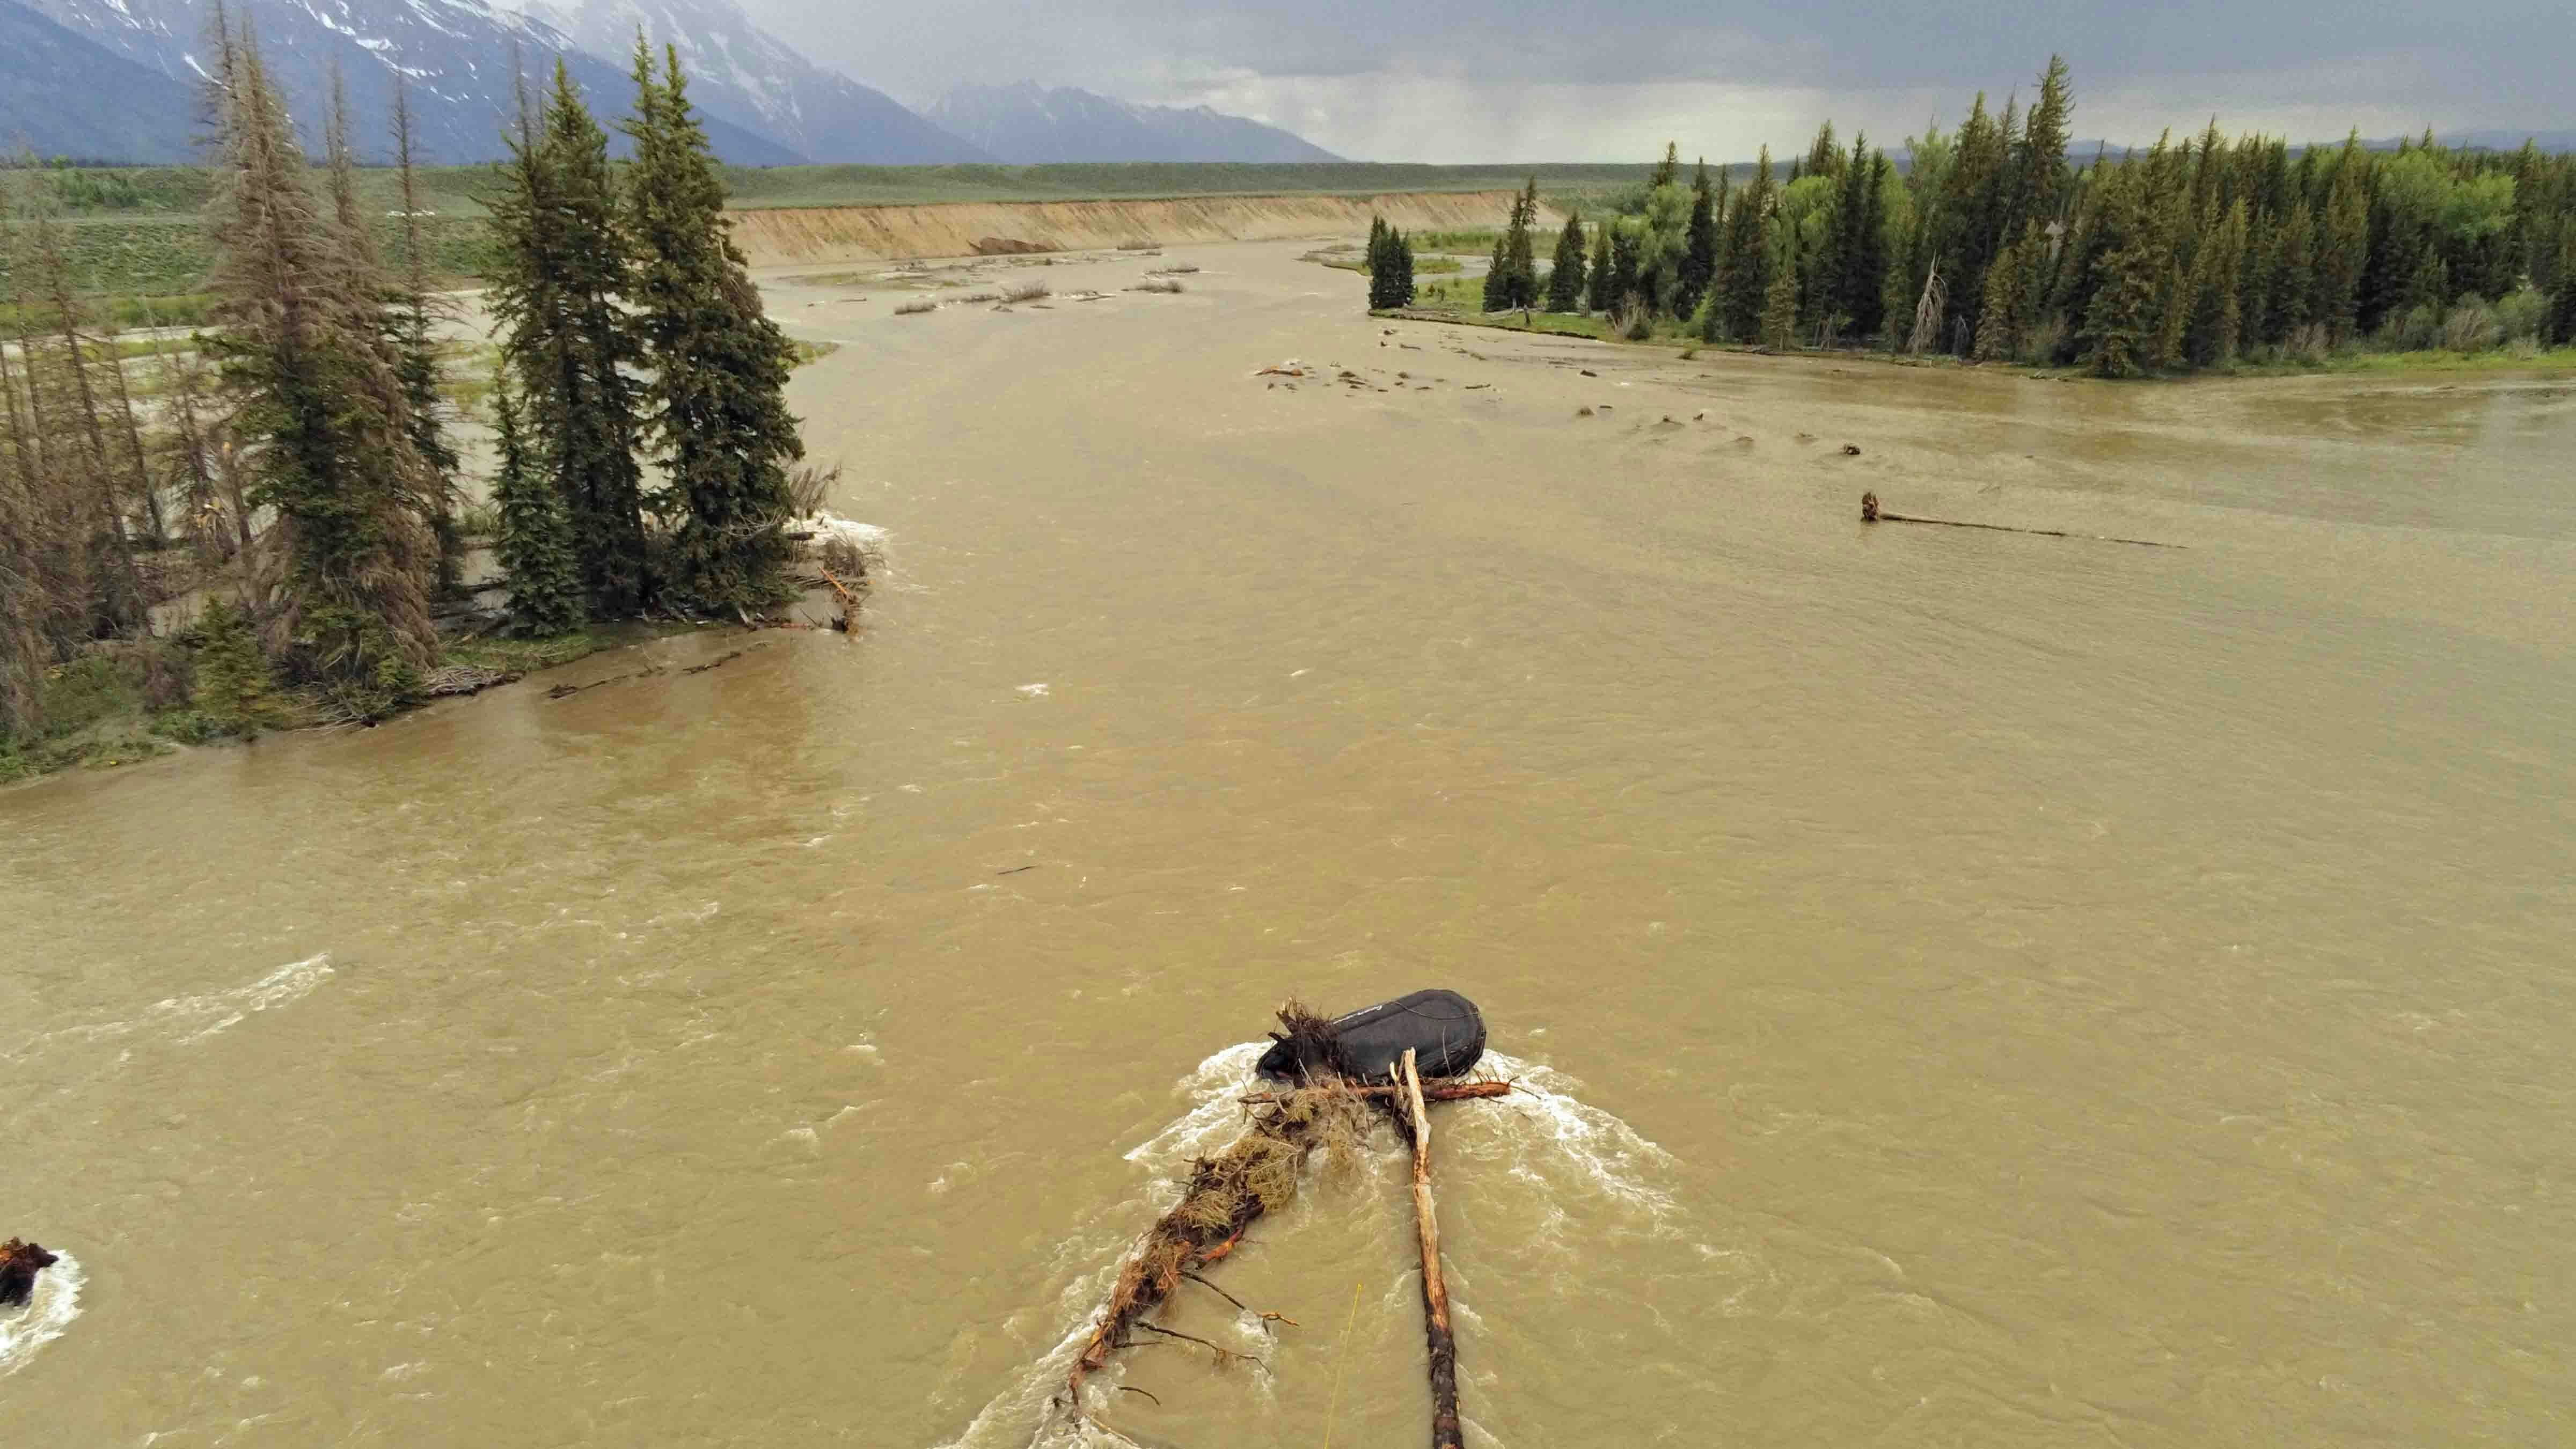 Commercial raft flipped after striking a snag in section of Snake River in Grand Teton National Park called “The Black Hole."